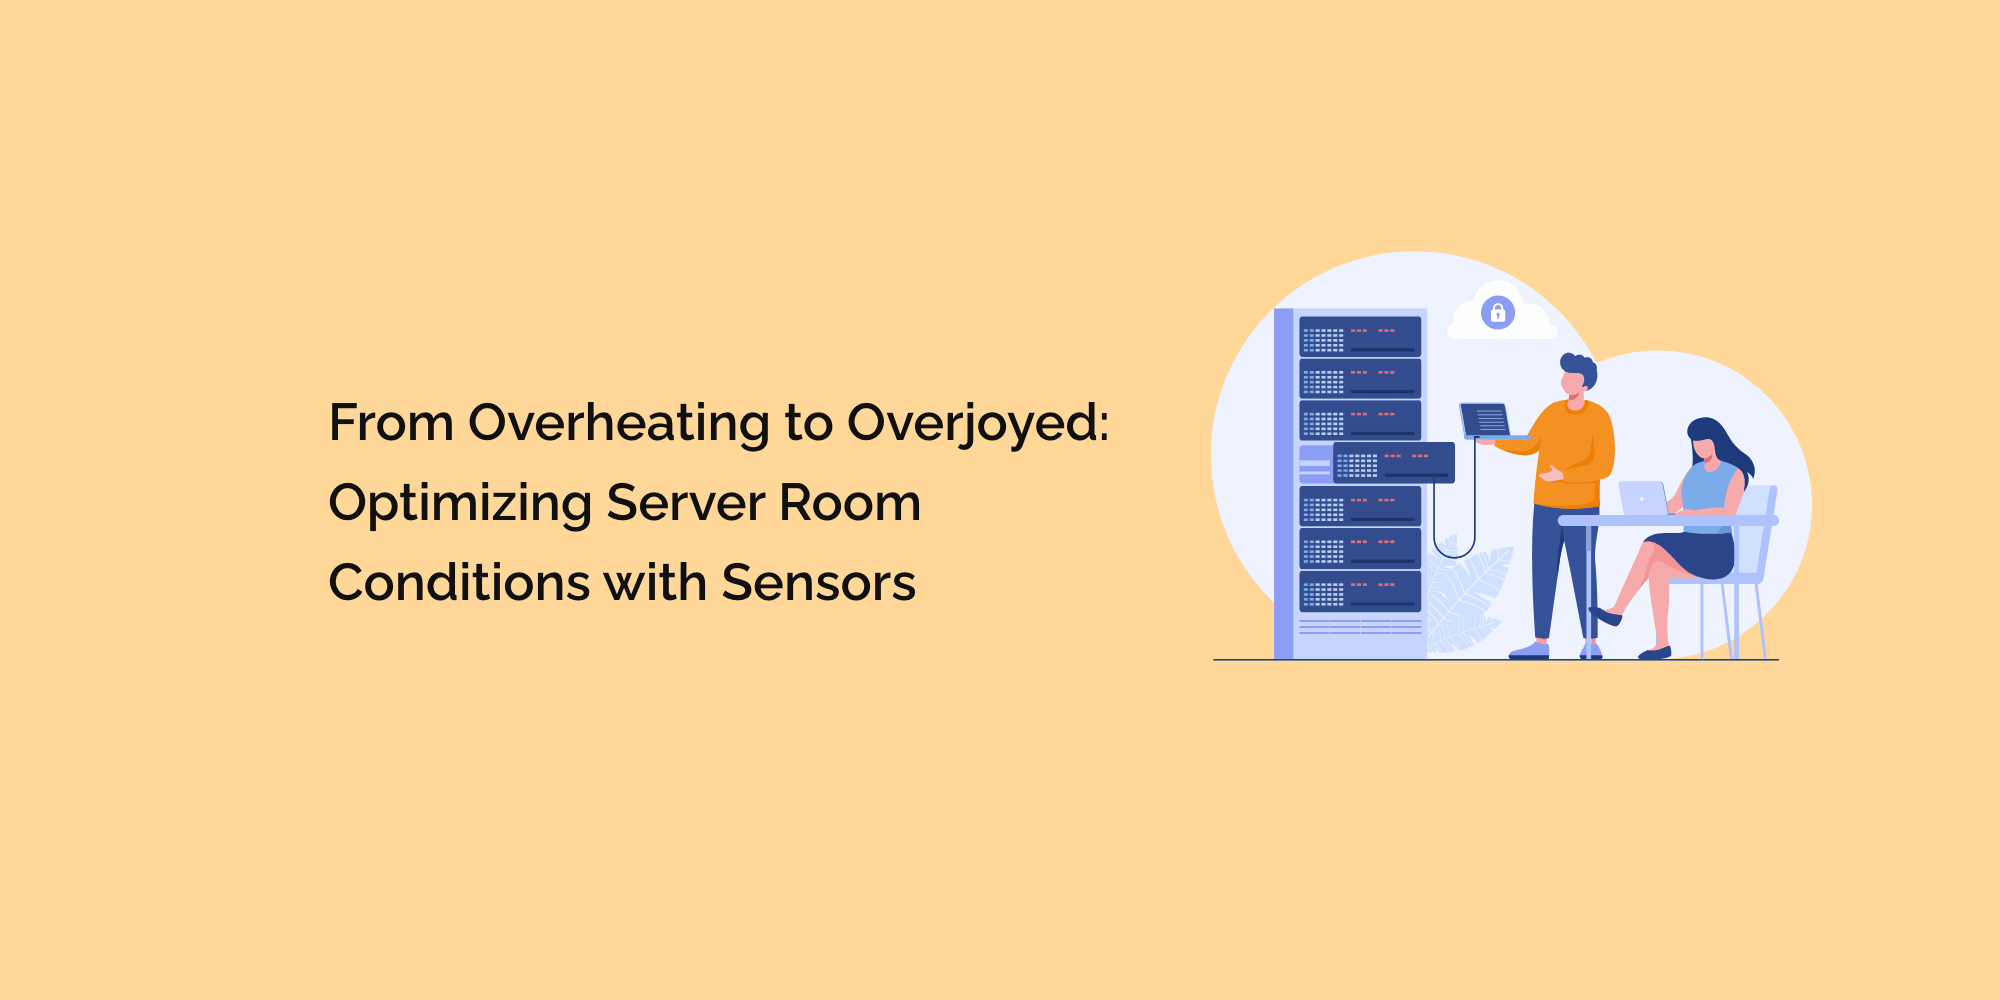 From Overheating to Overjoyed: Optimizing Server Room Conditions with Sensors